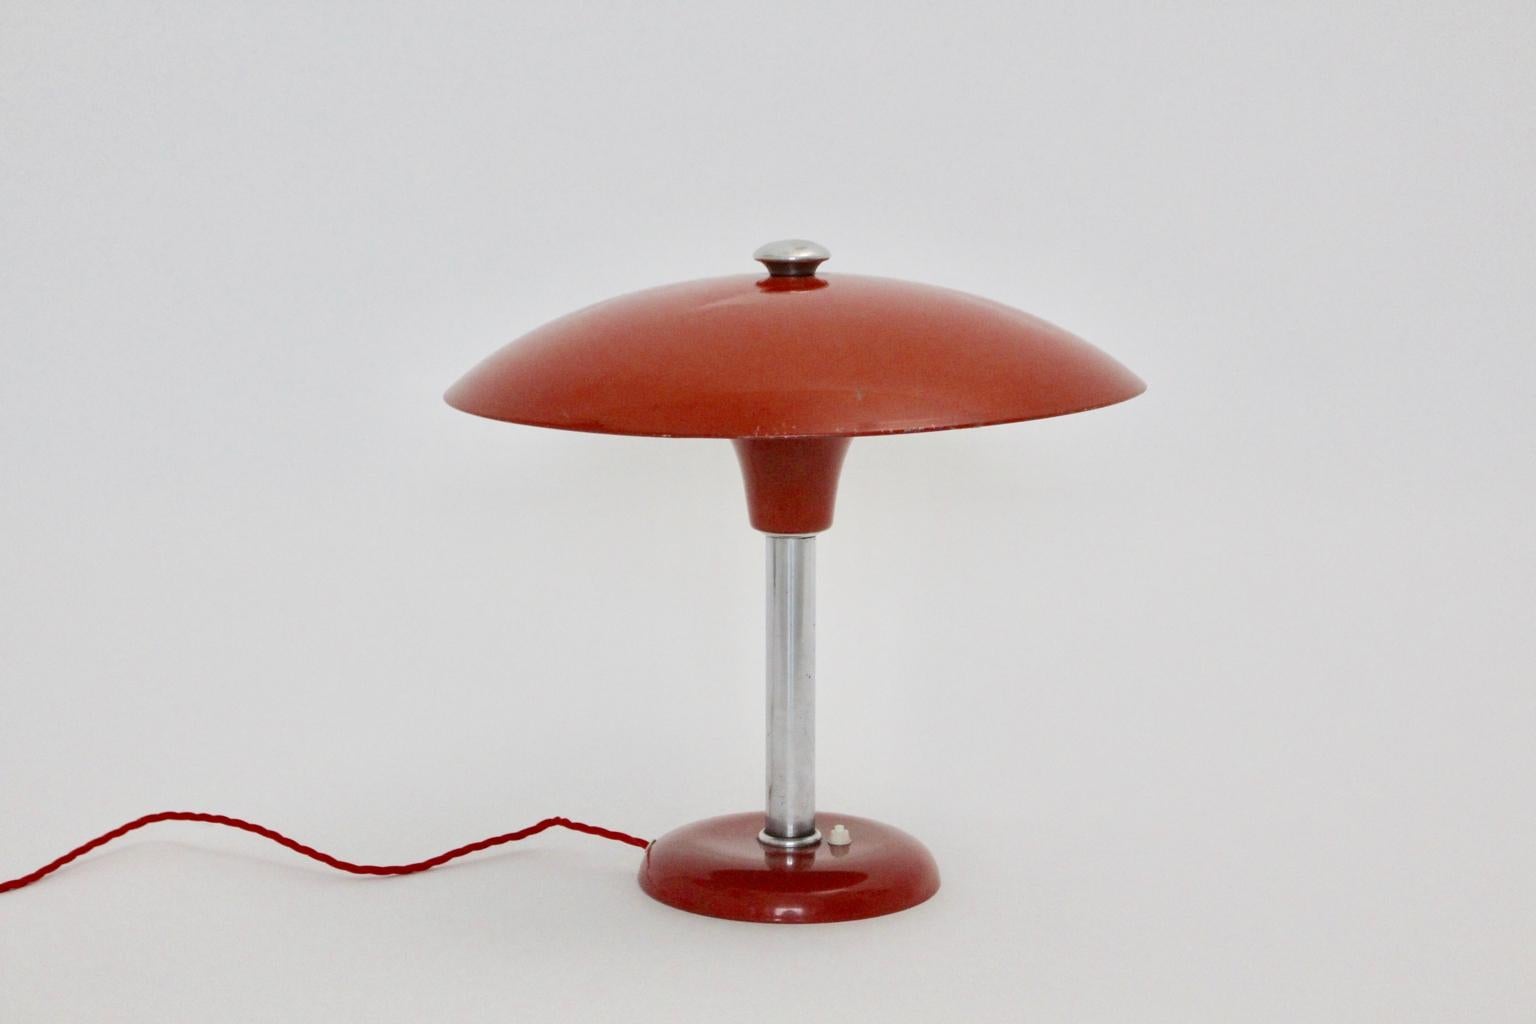 This presented rare red vintage desk lamp or table lamp designed by Max Schumacher 1934, executed by Werner Schröder, Lobenstein, Germany. Also the Bauhaus Era desk lamp is marked underneath MSW. Furthermore the desk lamp is in original condition